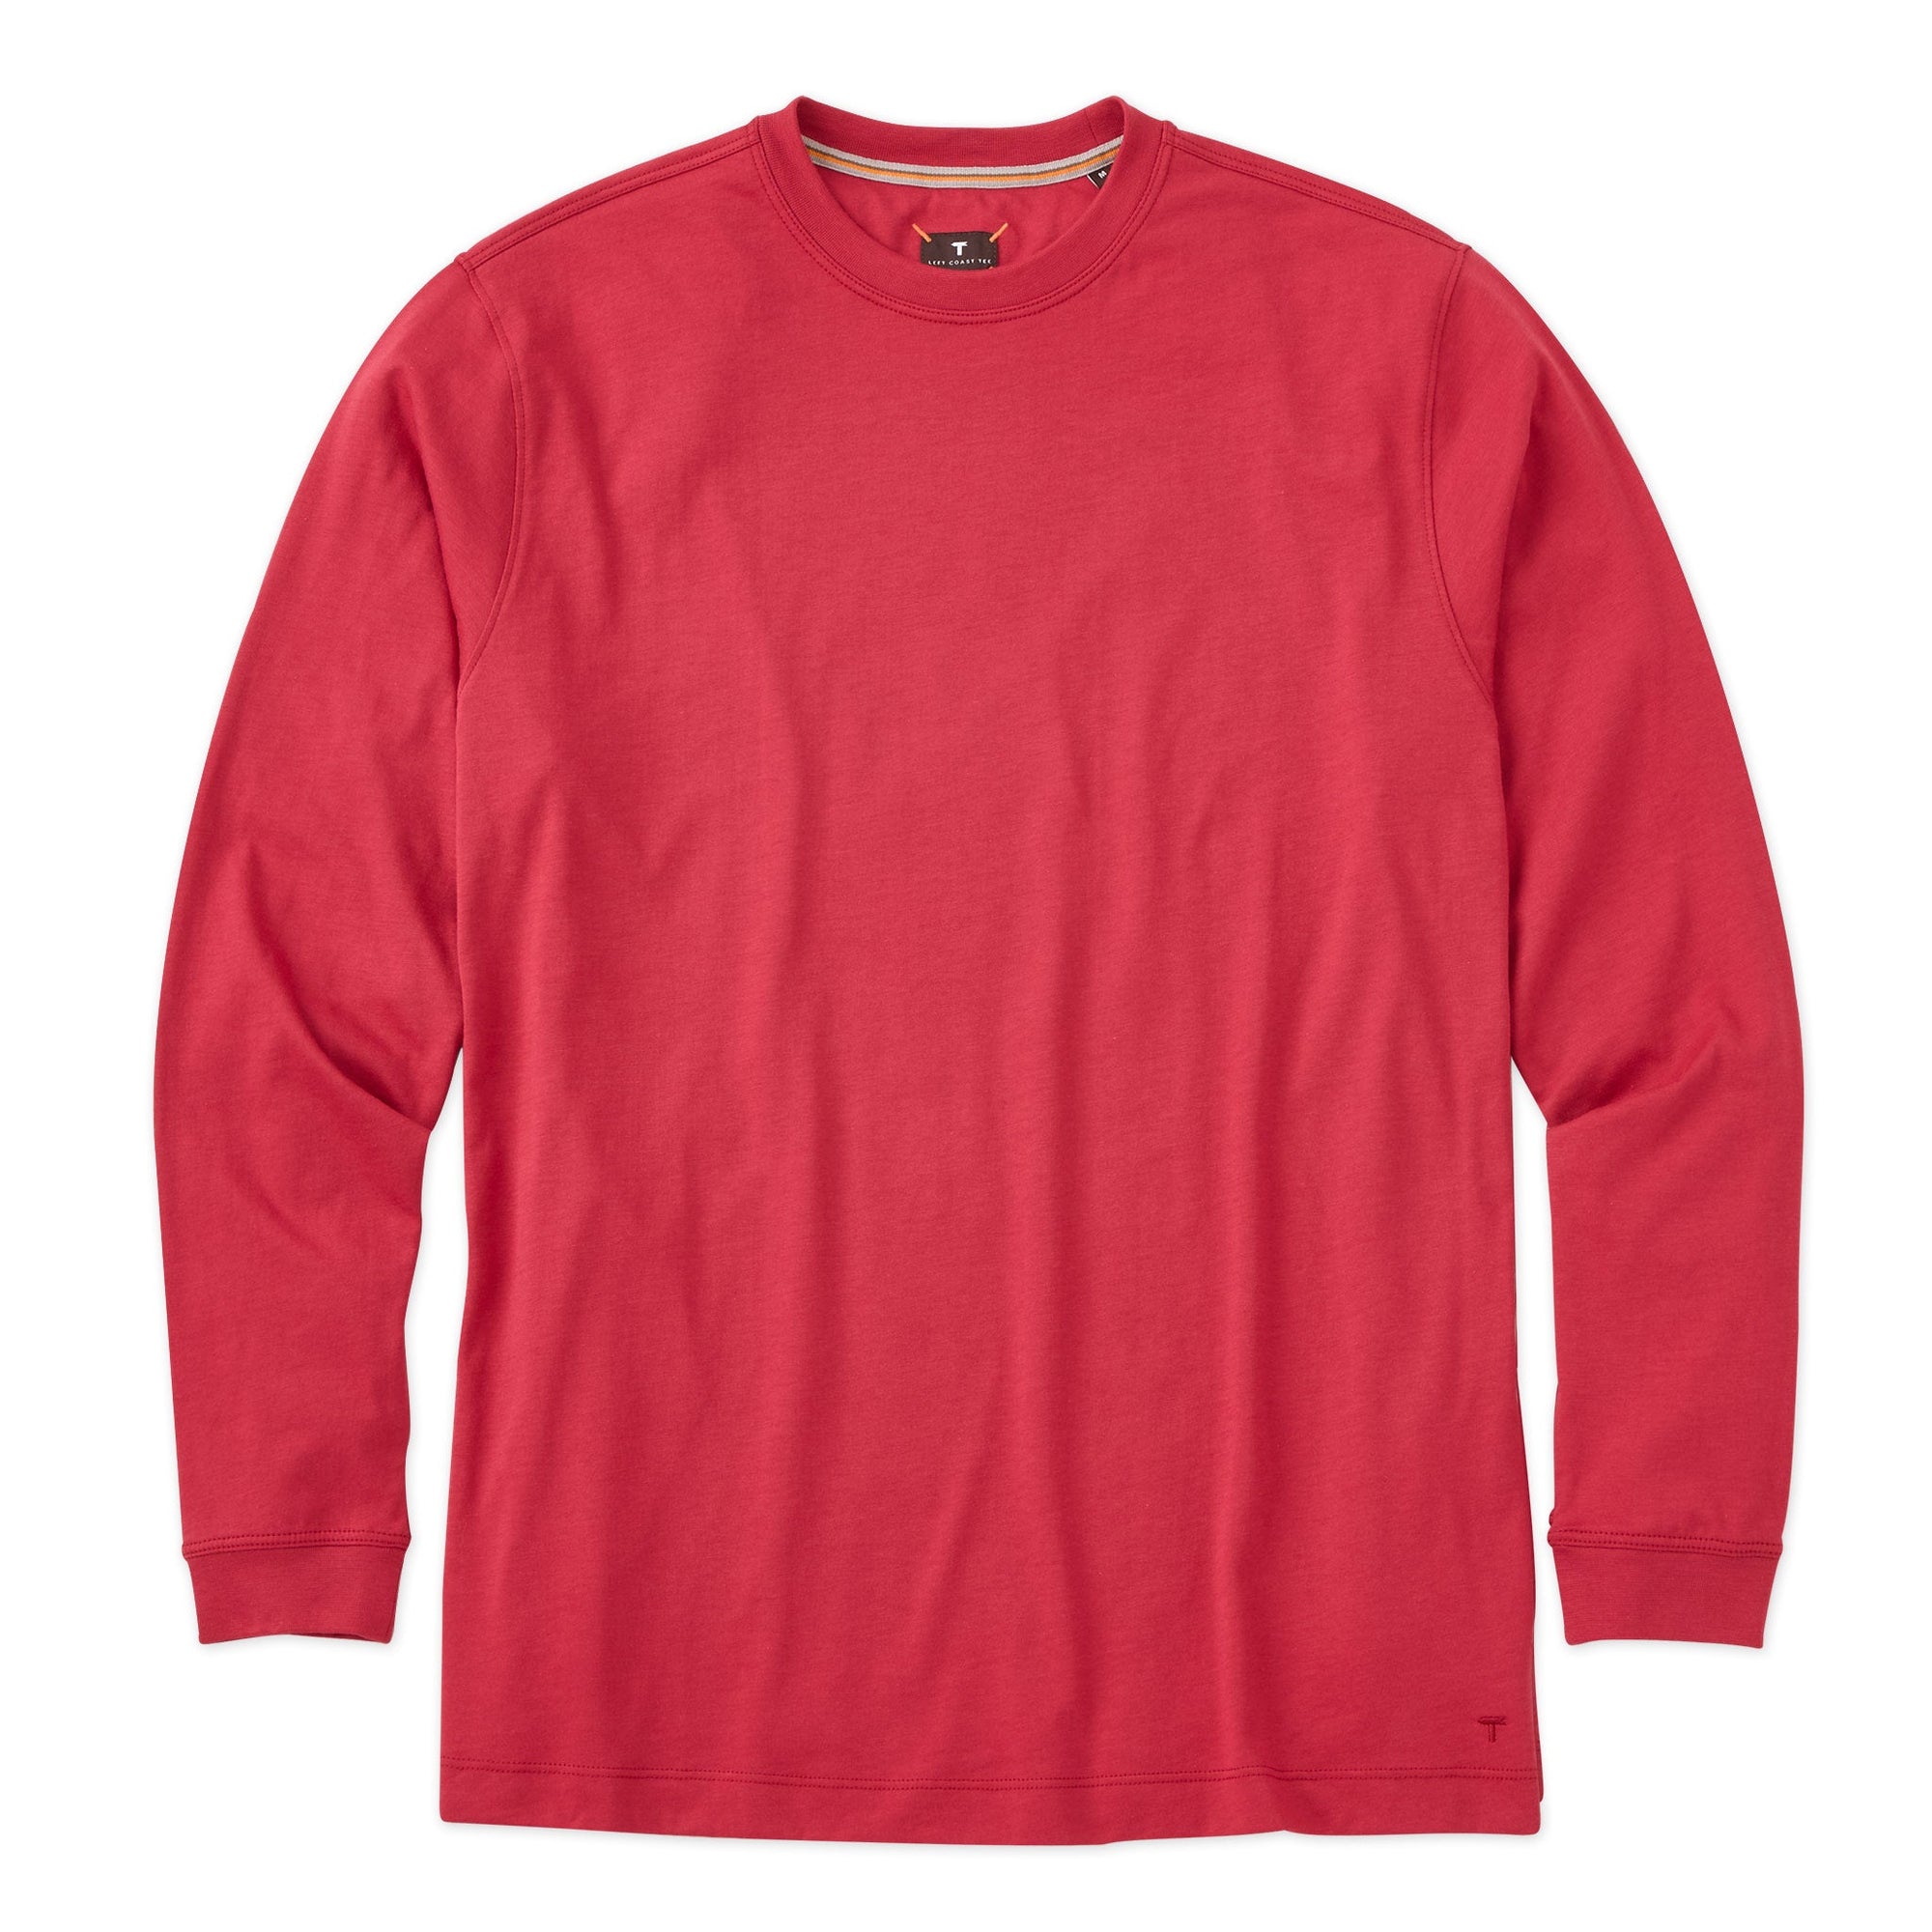 Long Sleeve Crew Neck Peruvian Cotton Tee Shirt in Red by Left Coast Tee